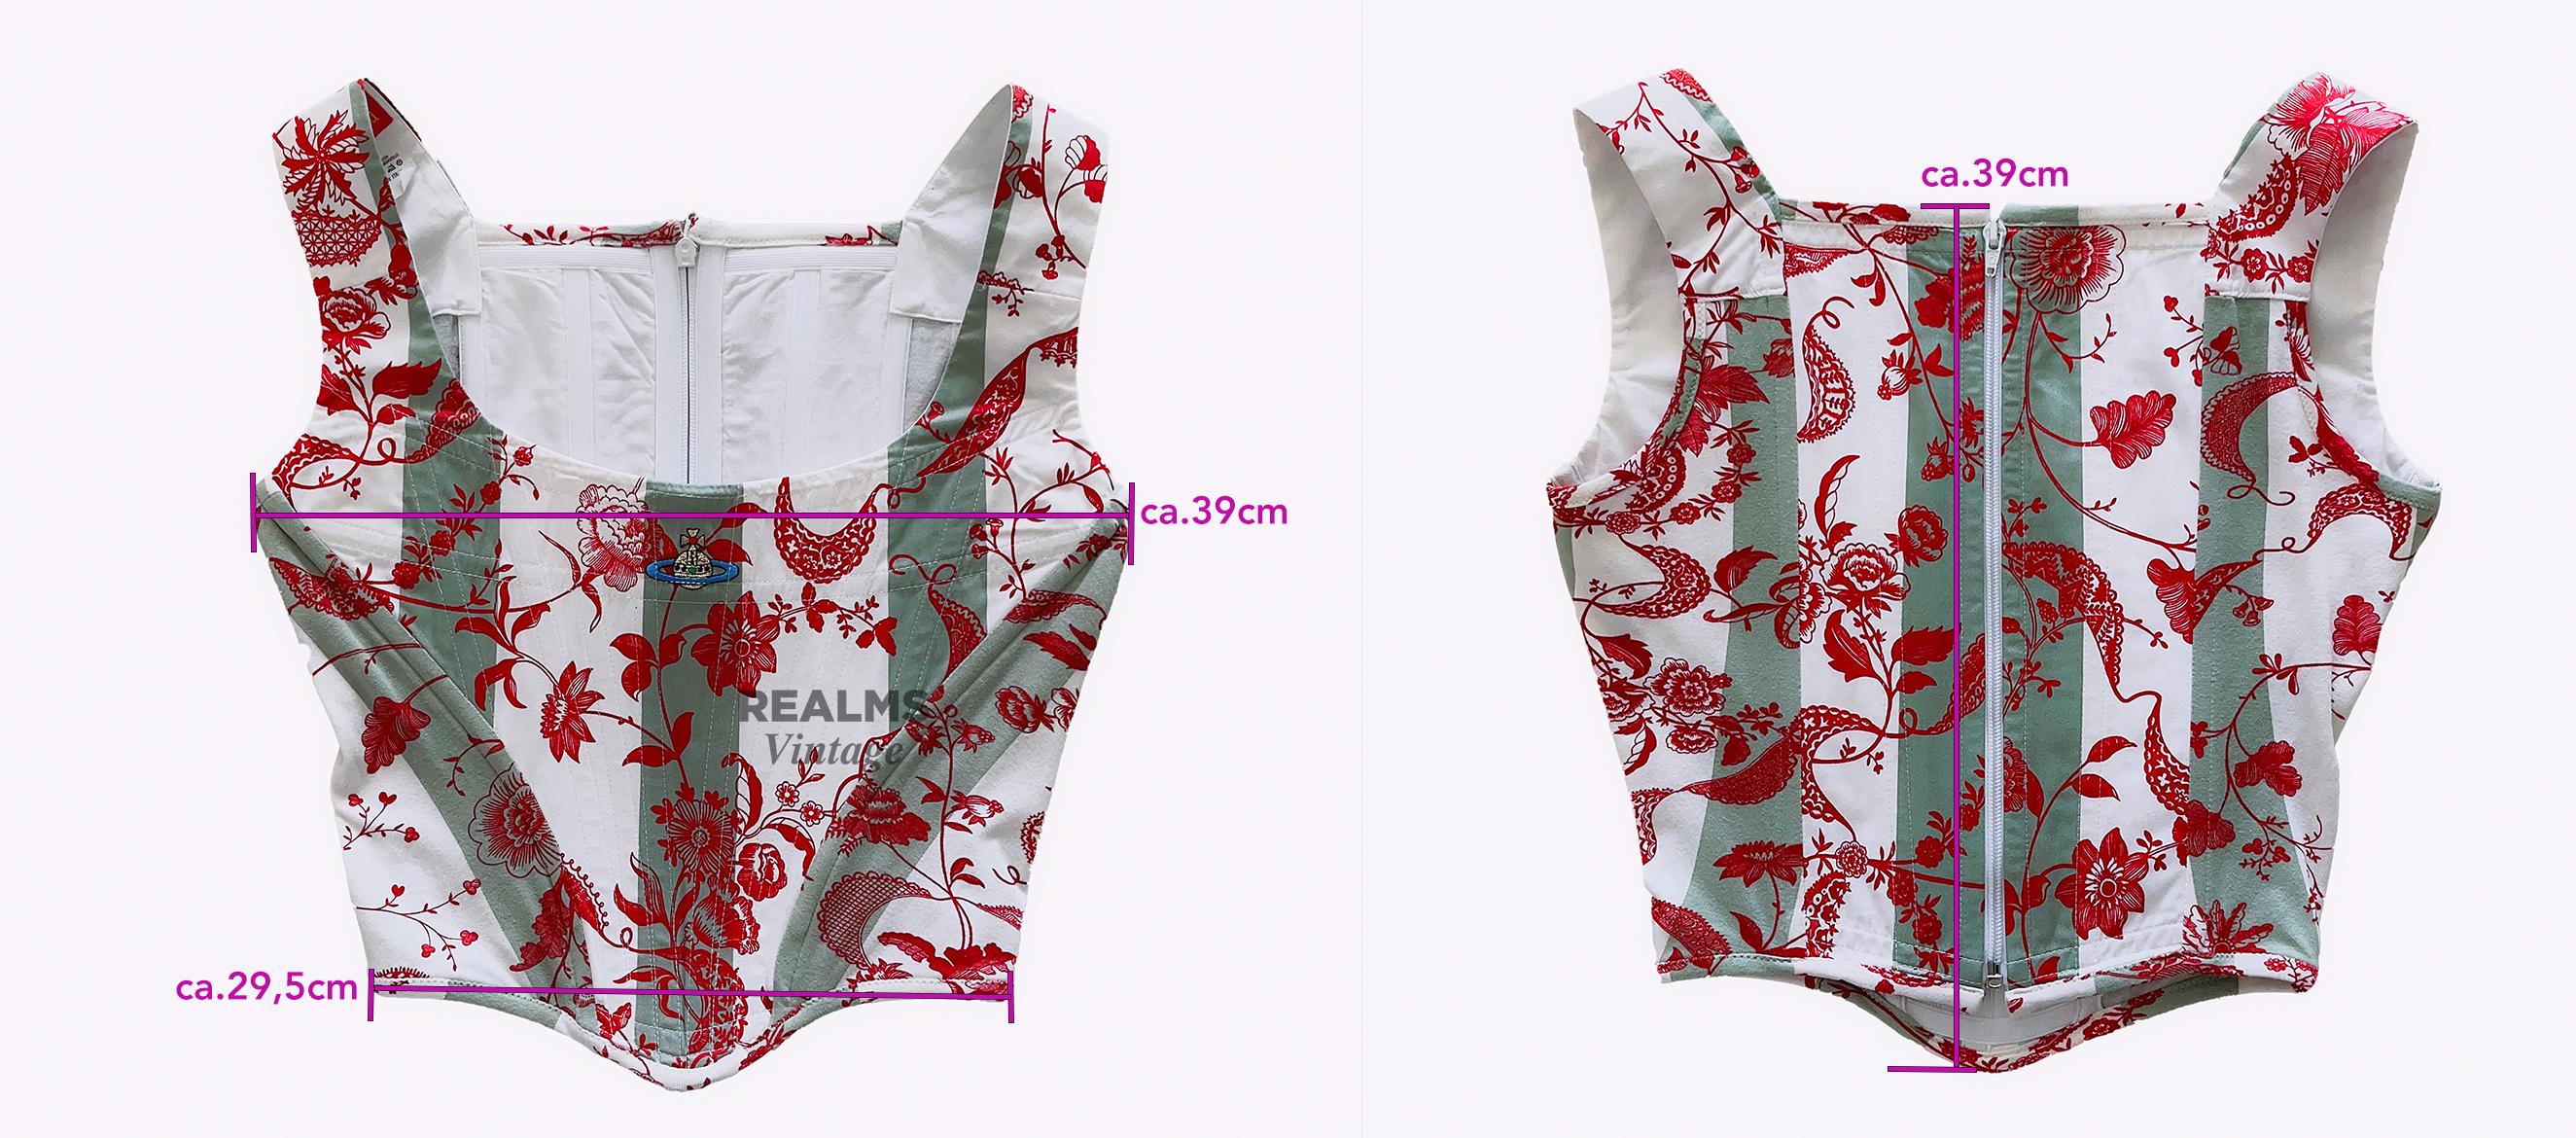 Vivienne Westwood Corset Iconic Rare 90s Red Label For Sale 5